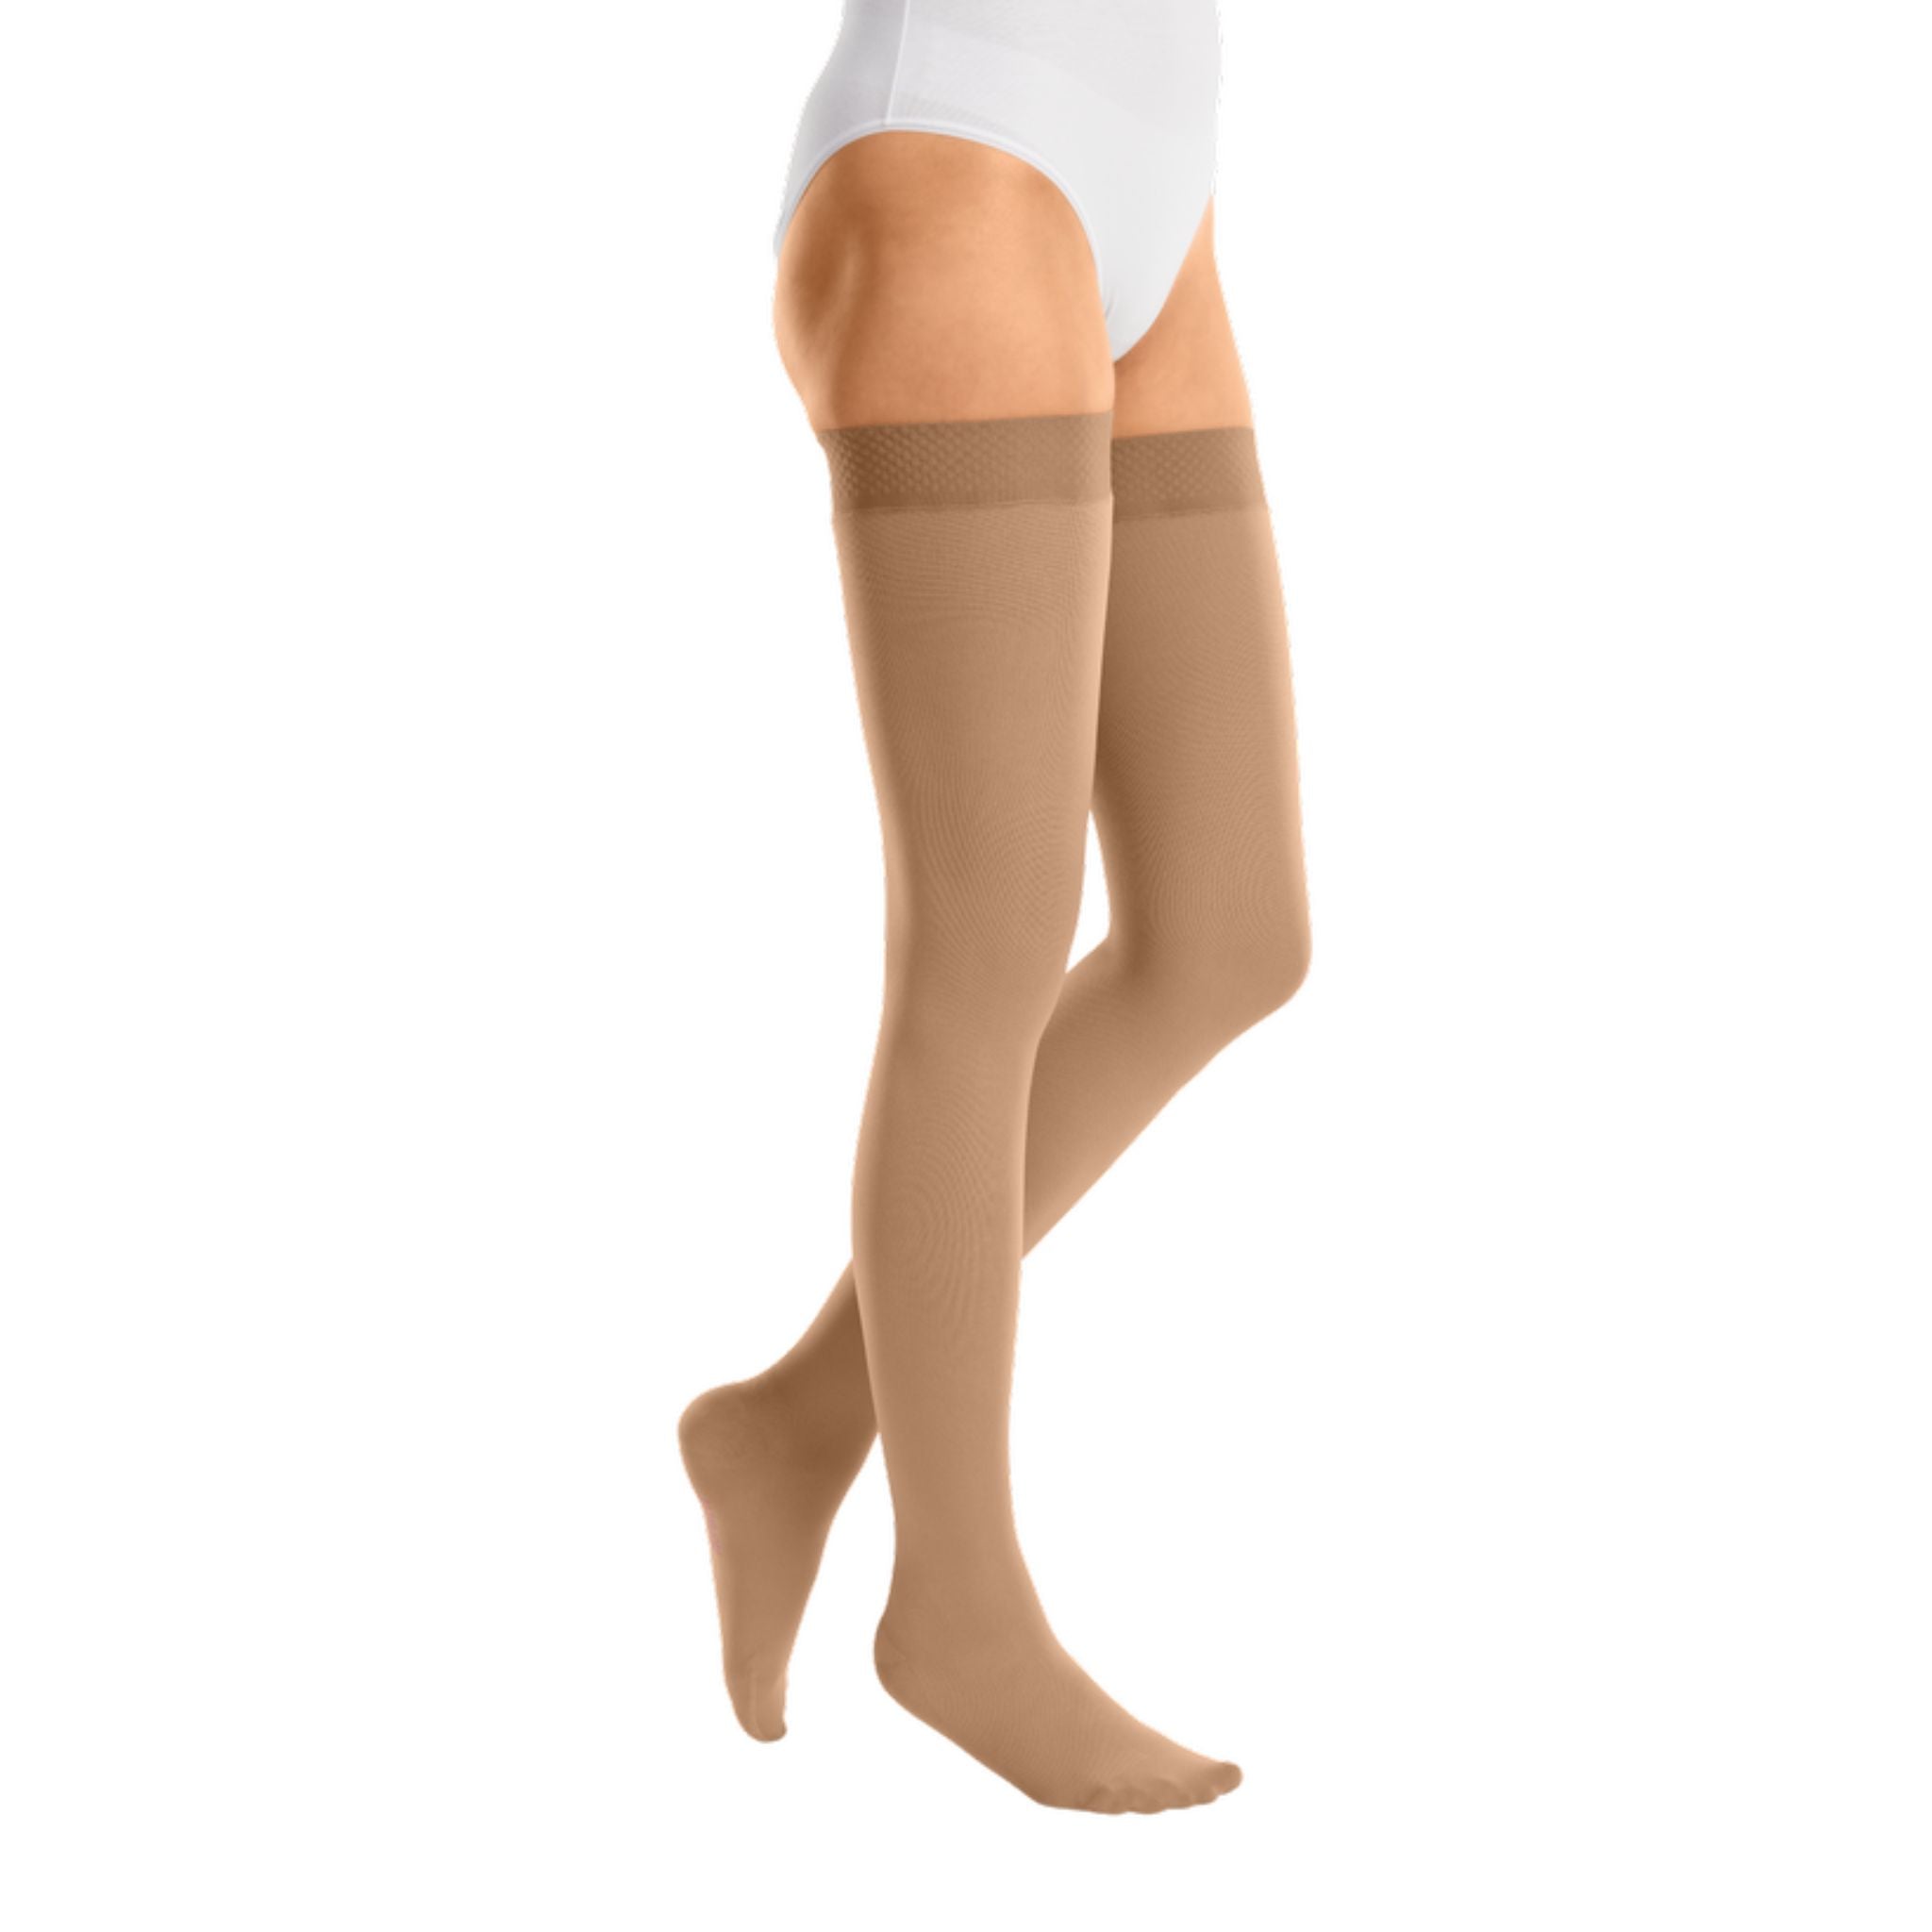 Compression Stockings  Thigh High  Silicone Topband Wide  Open Toe  Caramel  mediven cotton